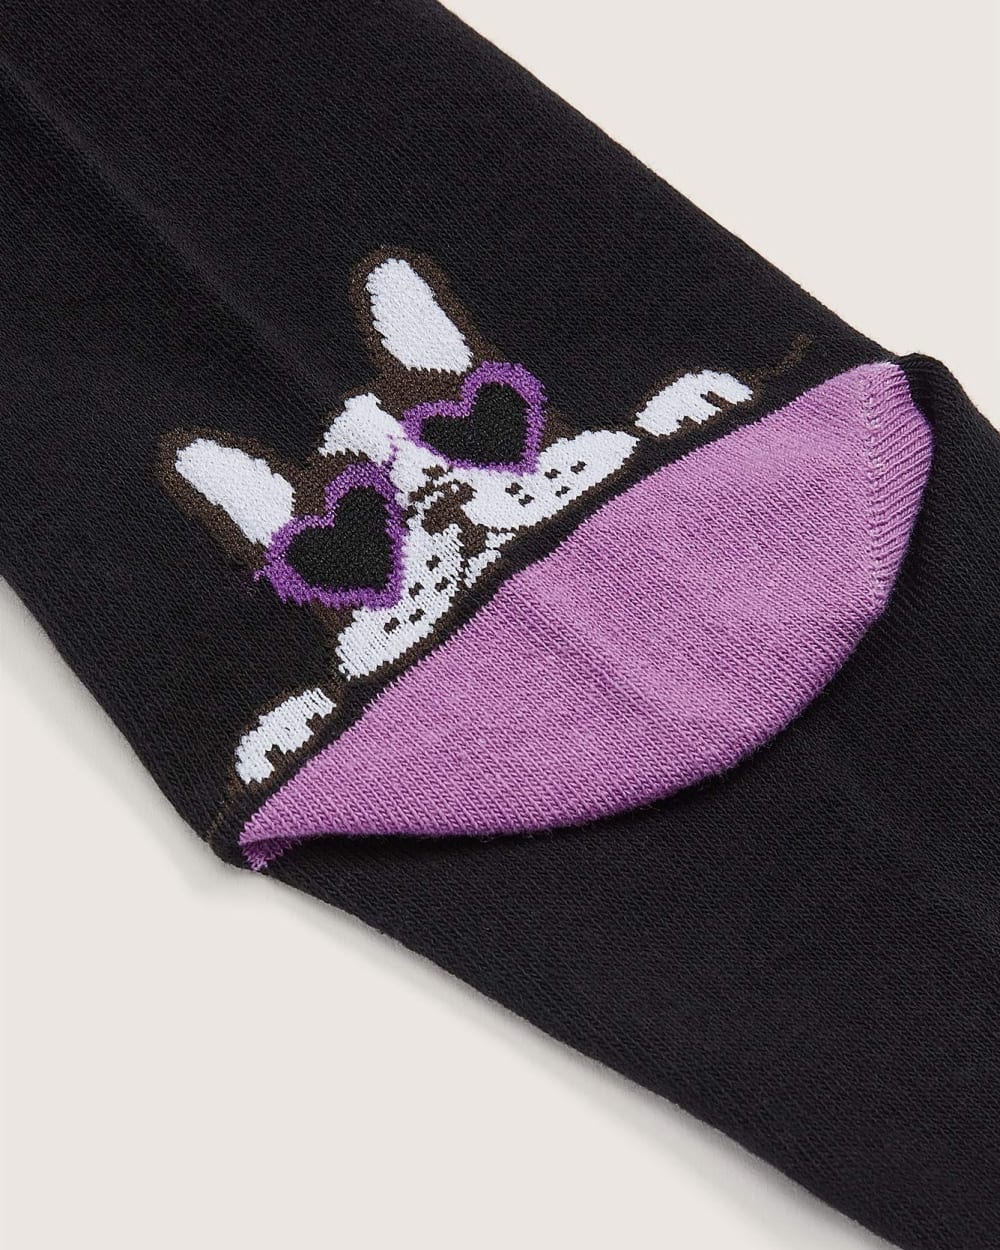 Crew Socks with Dog with Heart Glasses Placement Print | Penningtons